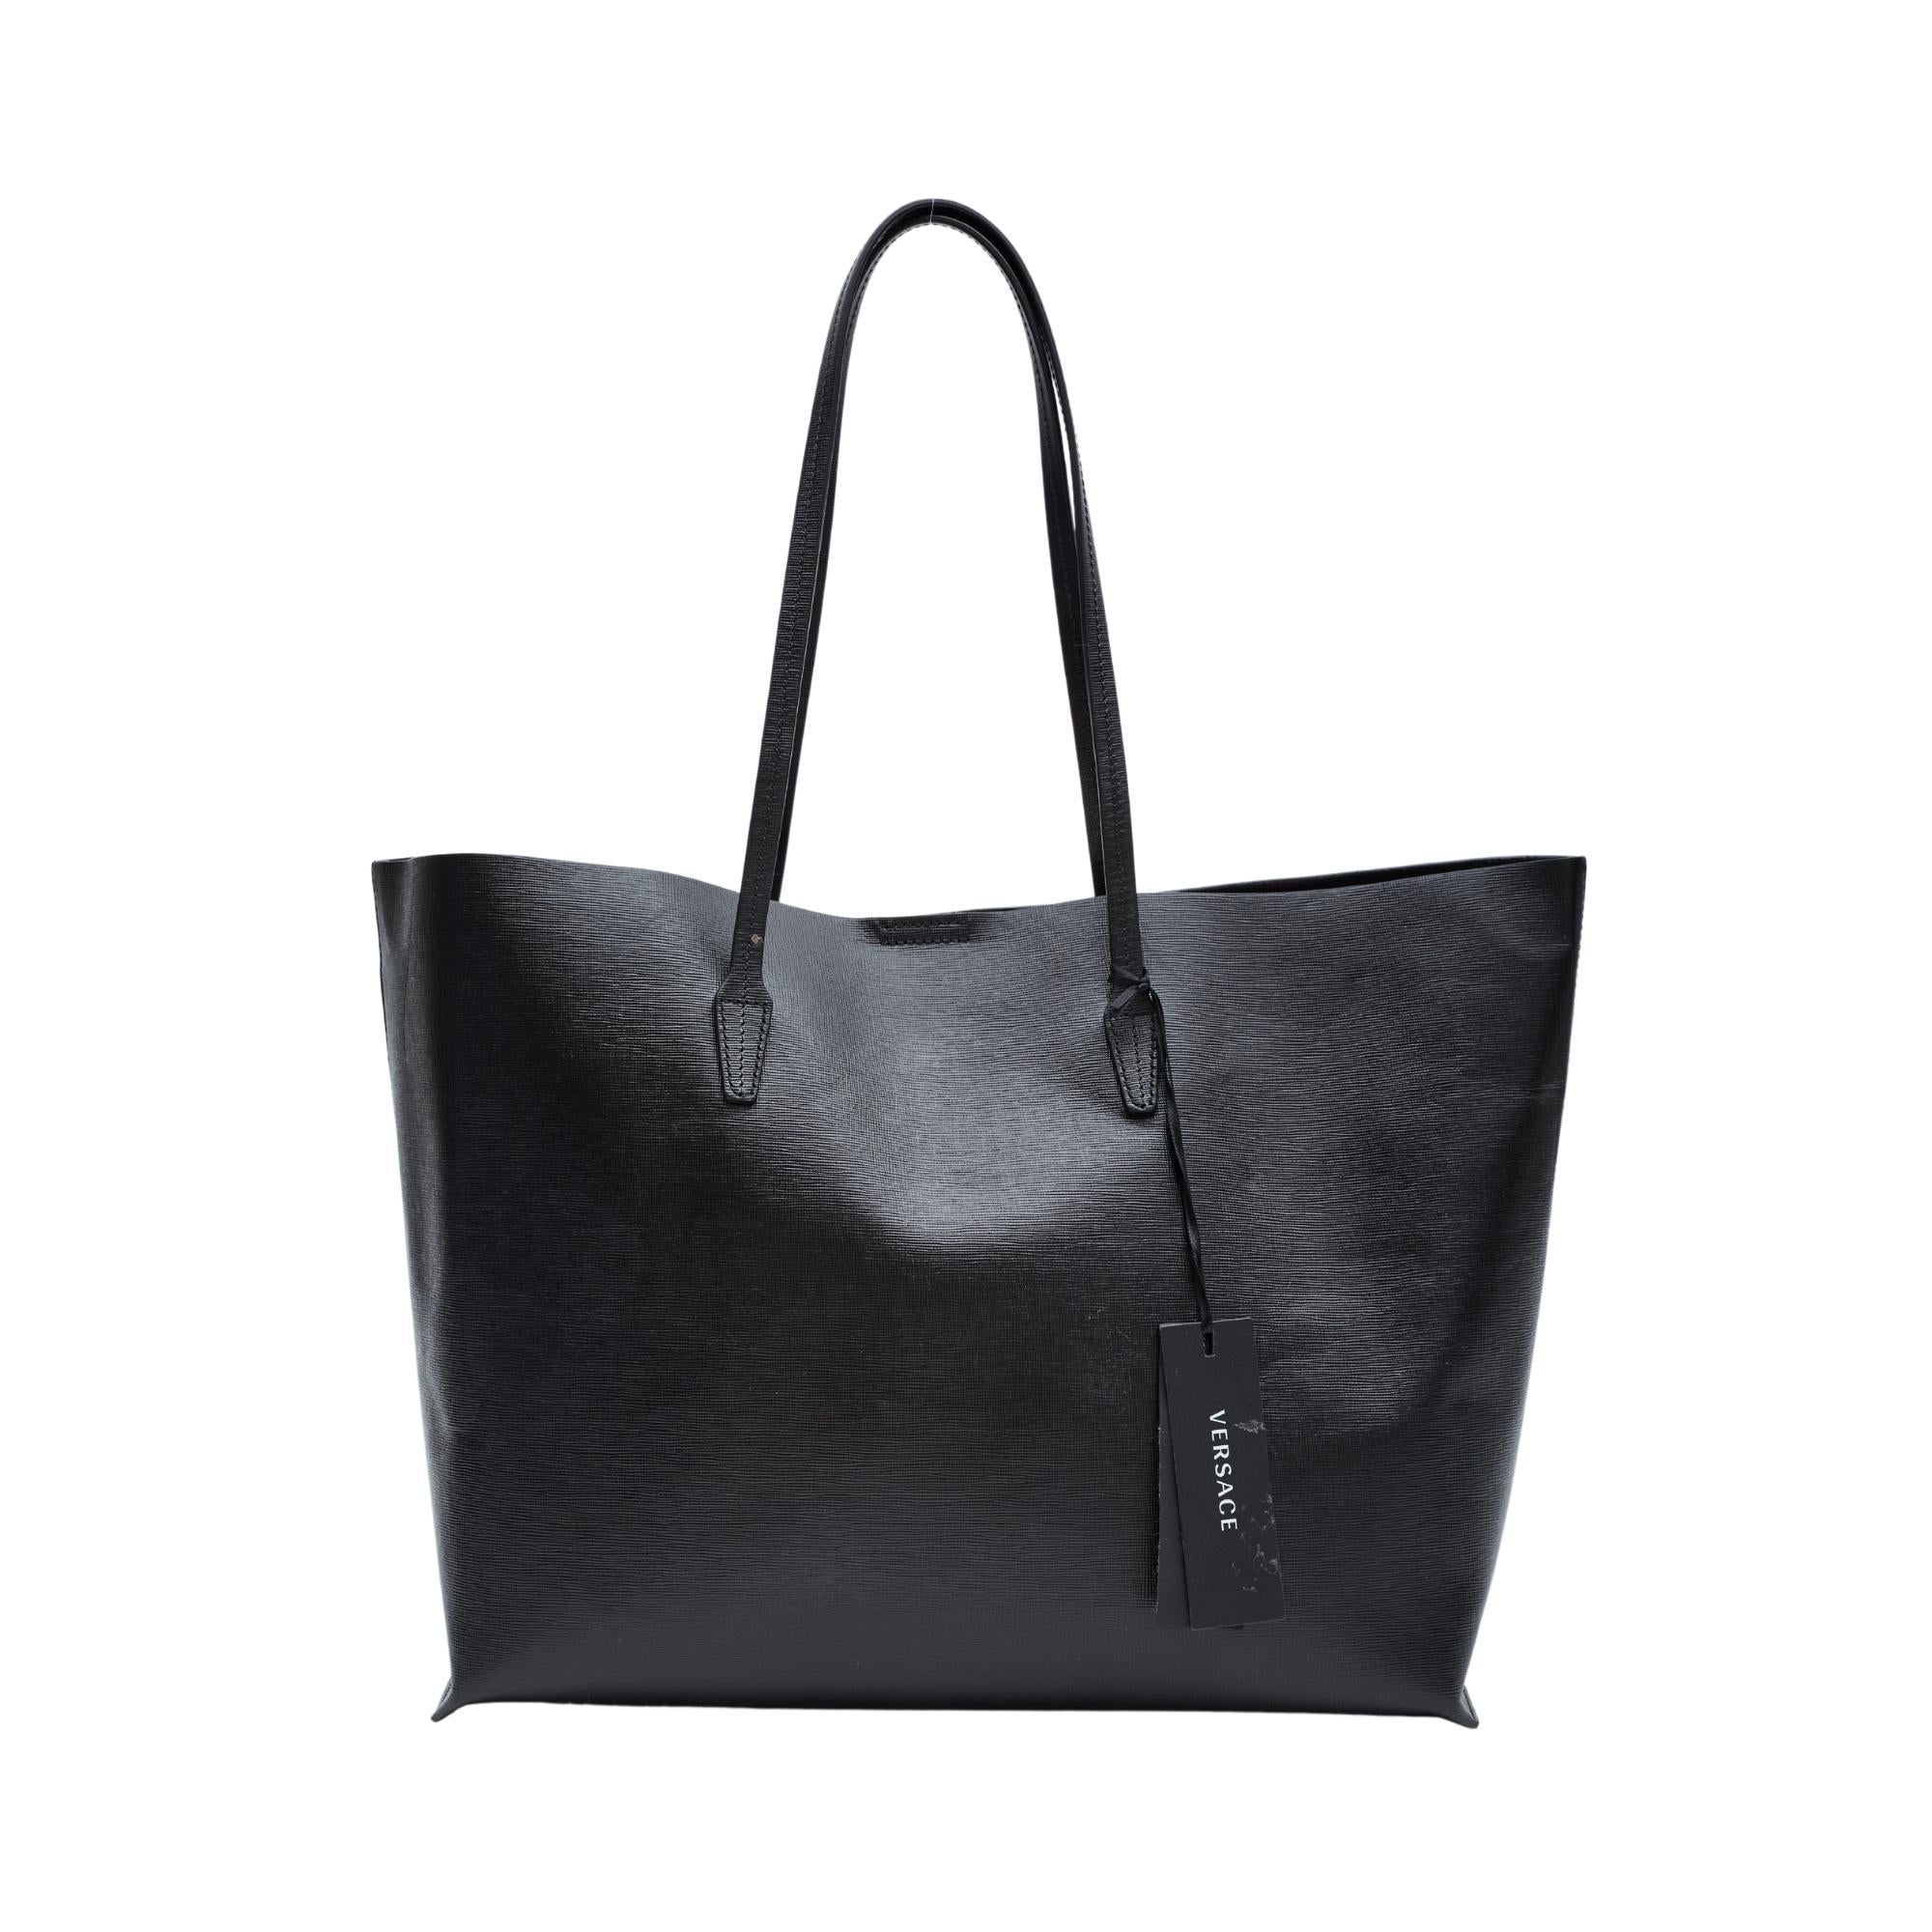 COLOR: Black
MATERIAL: Textured leather
MEASURES: H 11” x L 17” x D 6”
DROP: 10”
COMES WITH: Dust bag
CONDITION: New

Made in Italy